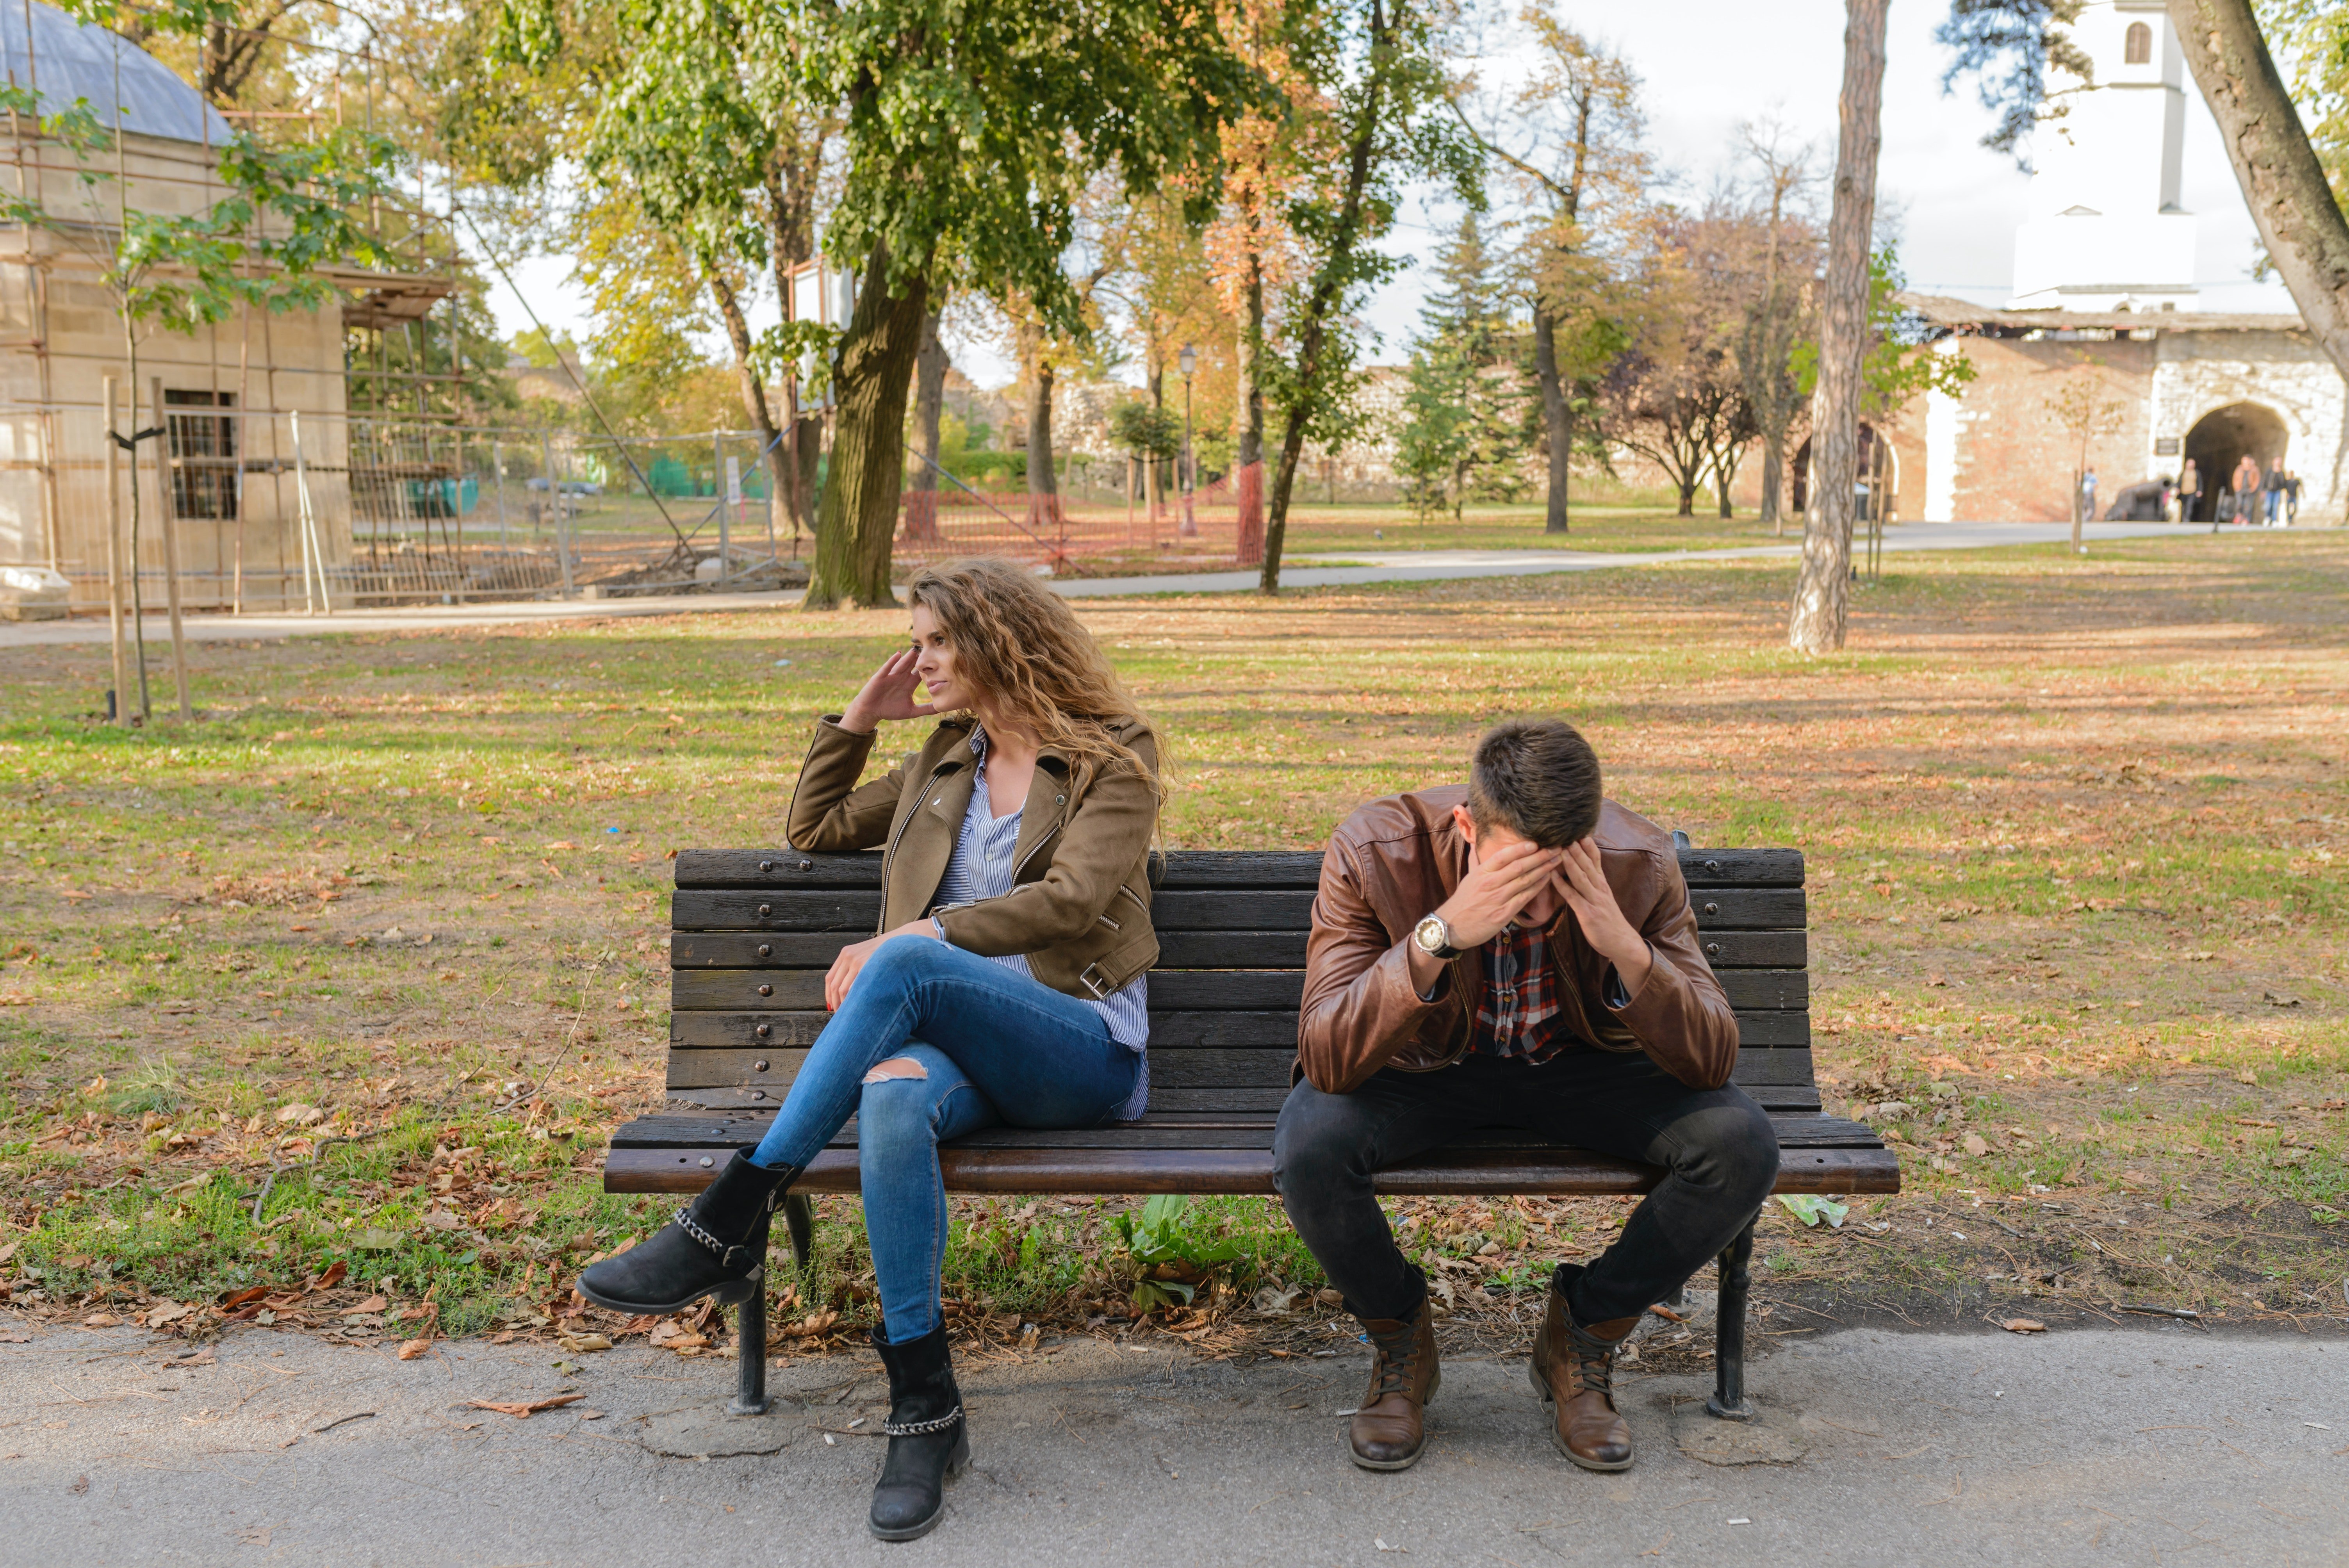 A couple sitting on a wooden bench after an argument. | Source: Pexels